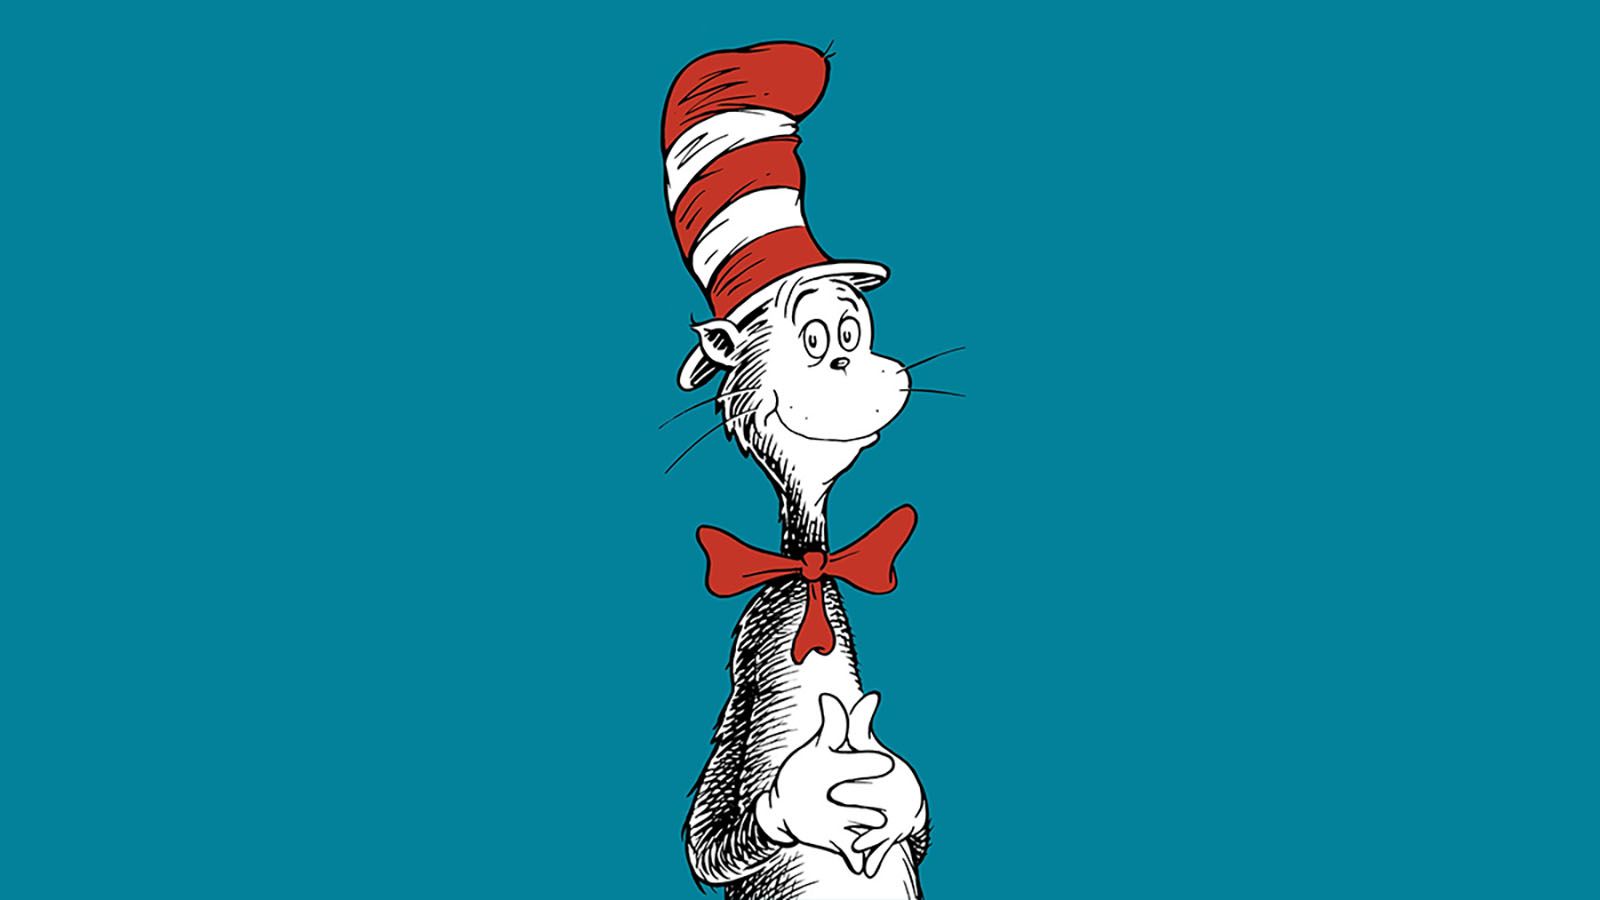 My Autism Ally is hosting a sensory-friendly Dr. Seuss party on March 18 at PFW.